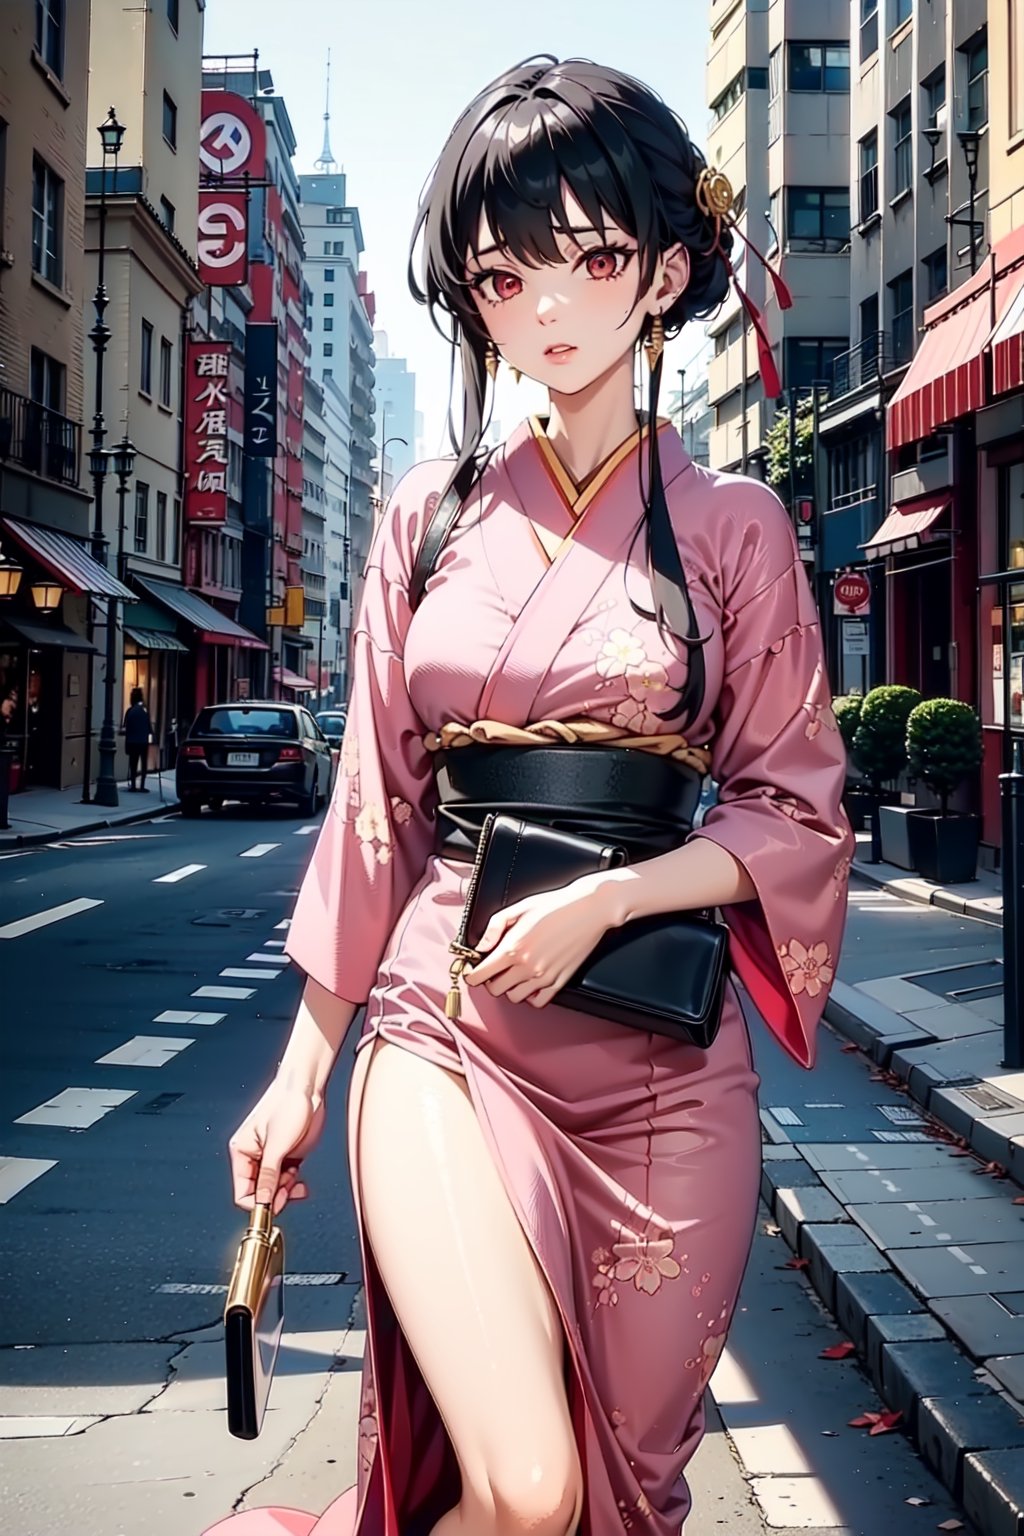 The image shows a woman in a pink kimono standing on a street in a city. She has long, black hair and is wearing a white blouse and pink kimono. She is holding a purse and has a cigarette in her hand. The background is a city street with buildings and cars in the distance. The overall mood of the image is sexy and alluring,china dress with heart cutout, red eyes,bbyorf